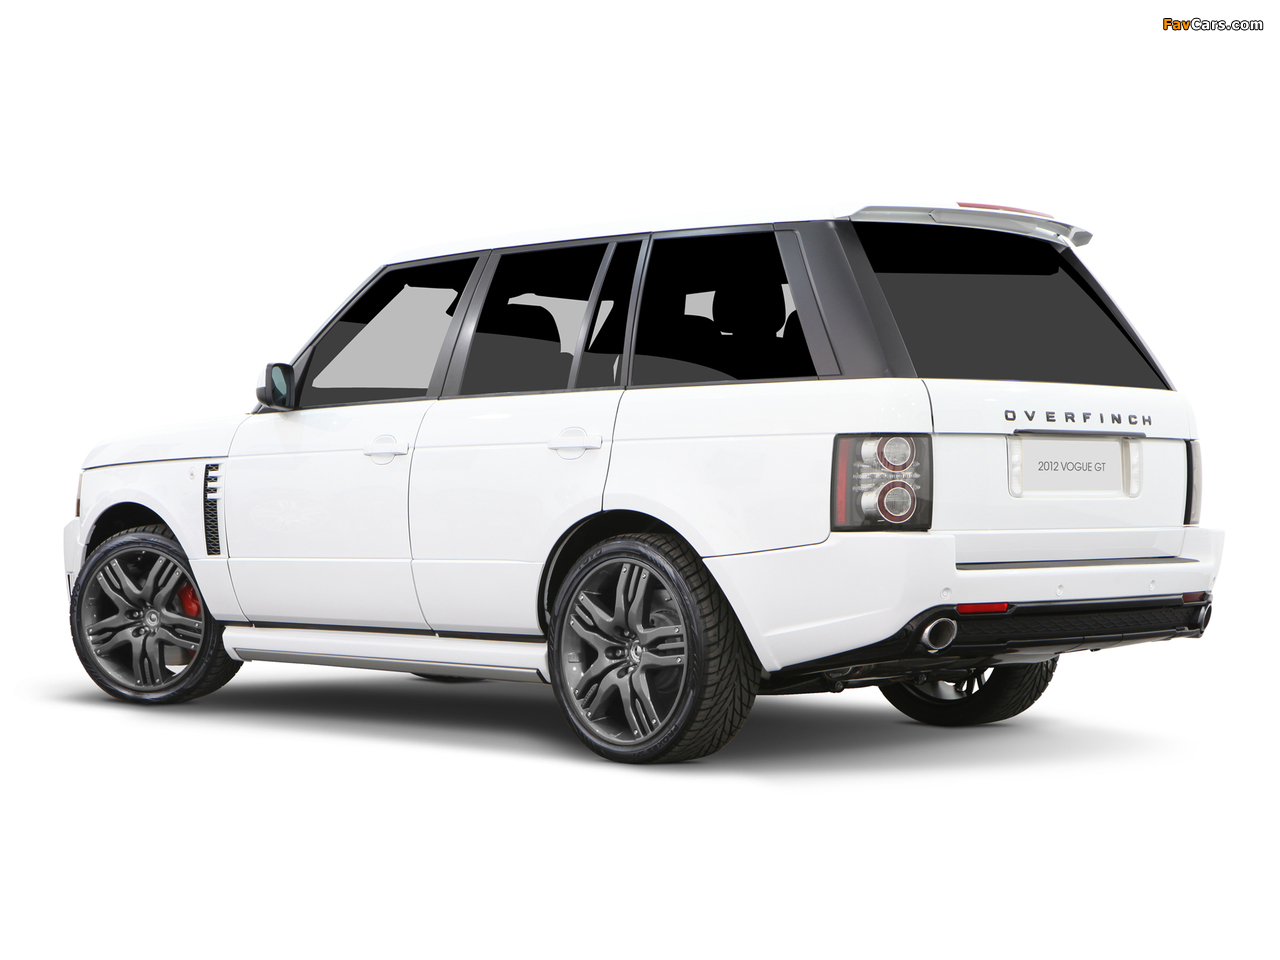 Overfinch Range Rover Vogue GT (L322) 2012 images (1280 x 960)